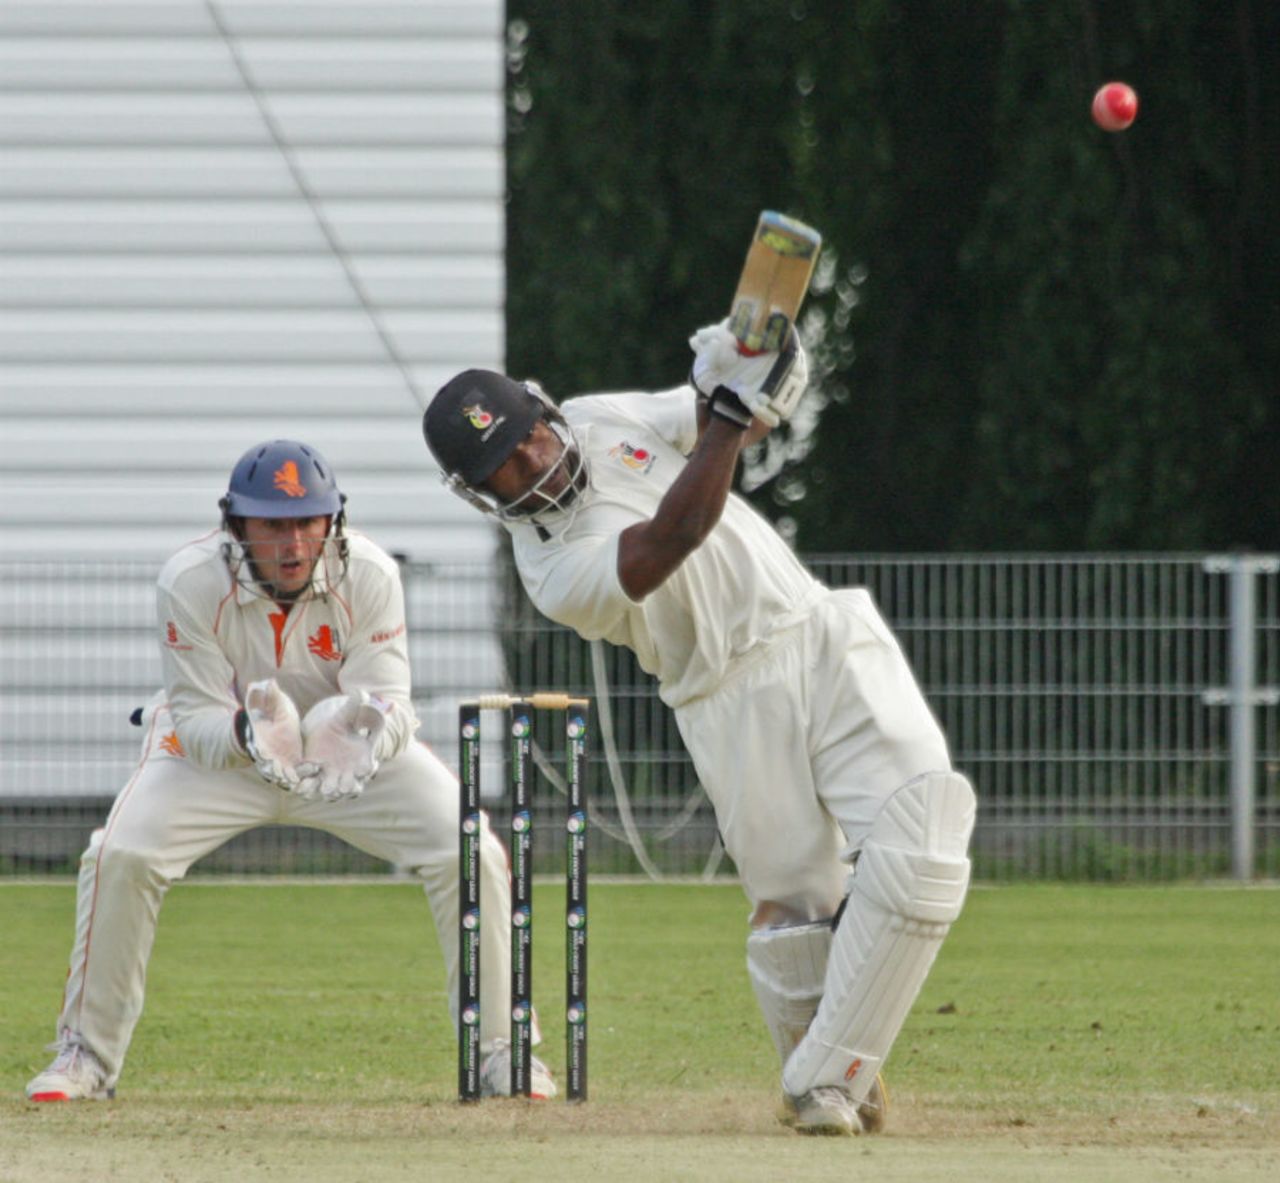 Jack Vare hits over the top, Netherlands v Papua New Guinea, Intercontinental Cup, Amstelveen, 1st day, June 16, 2015